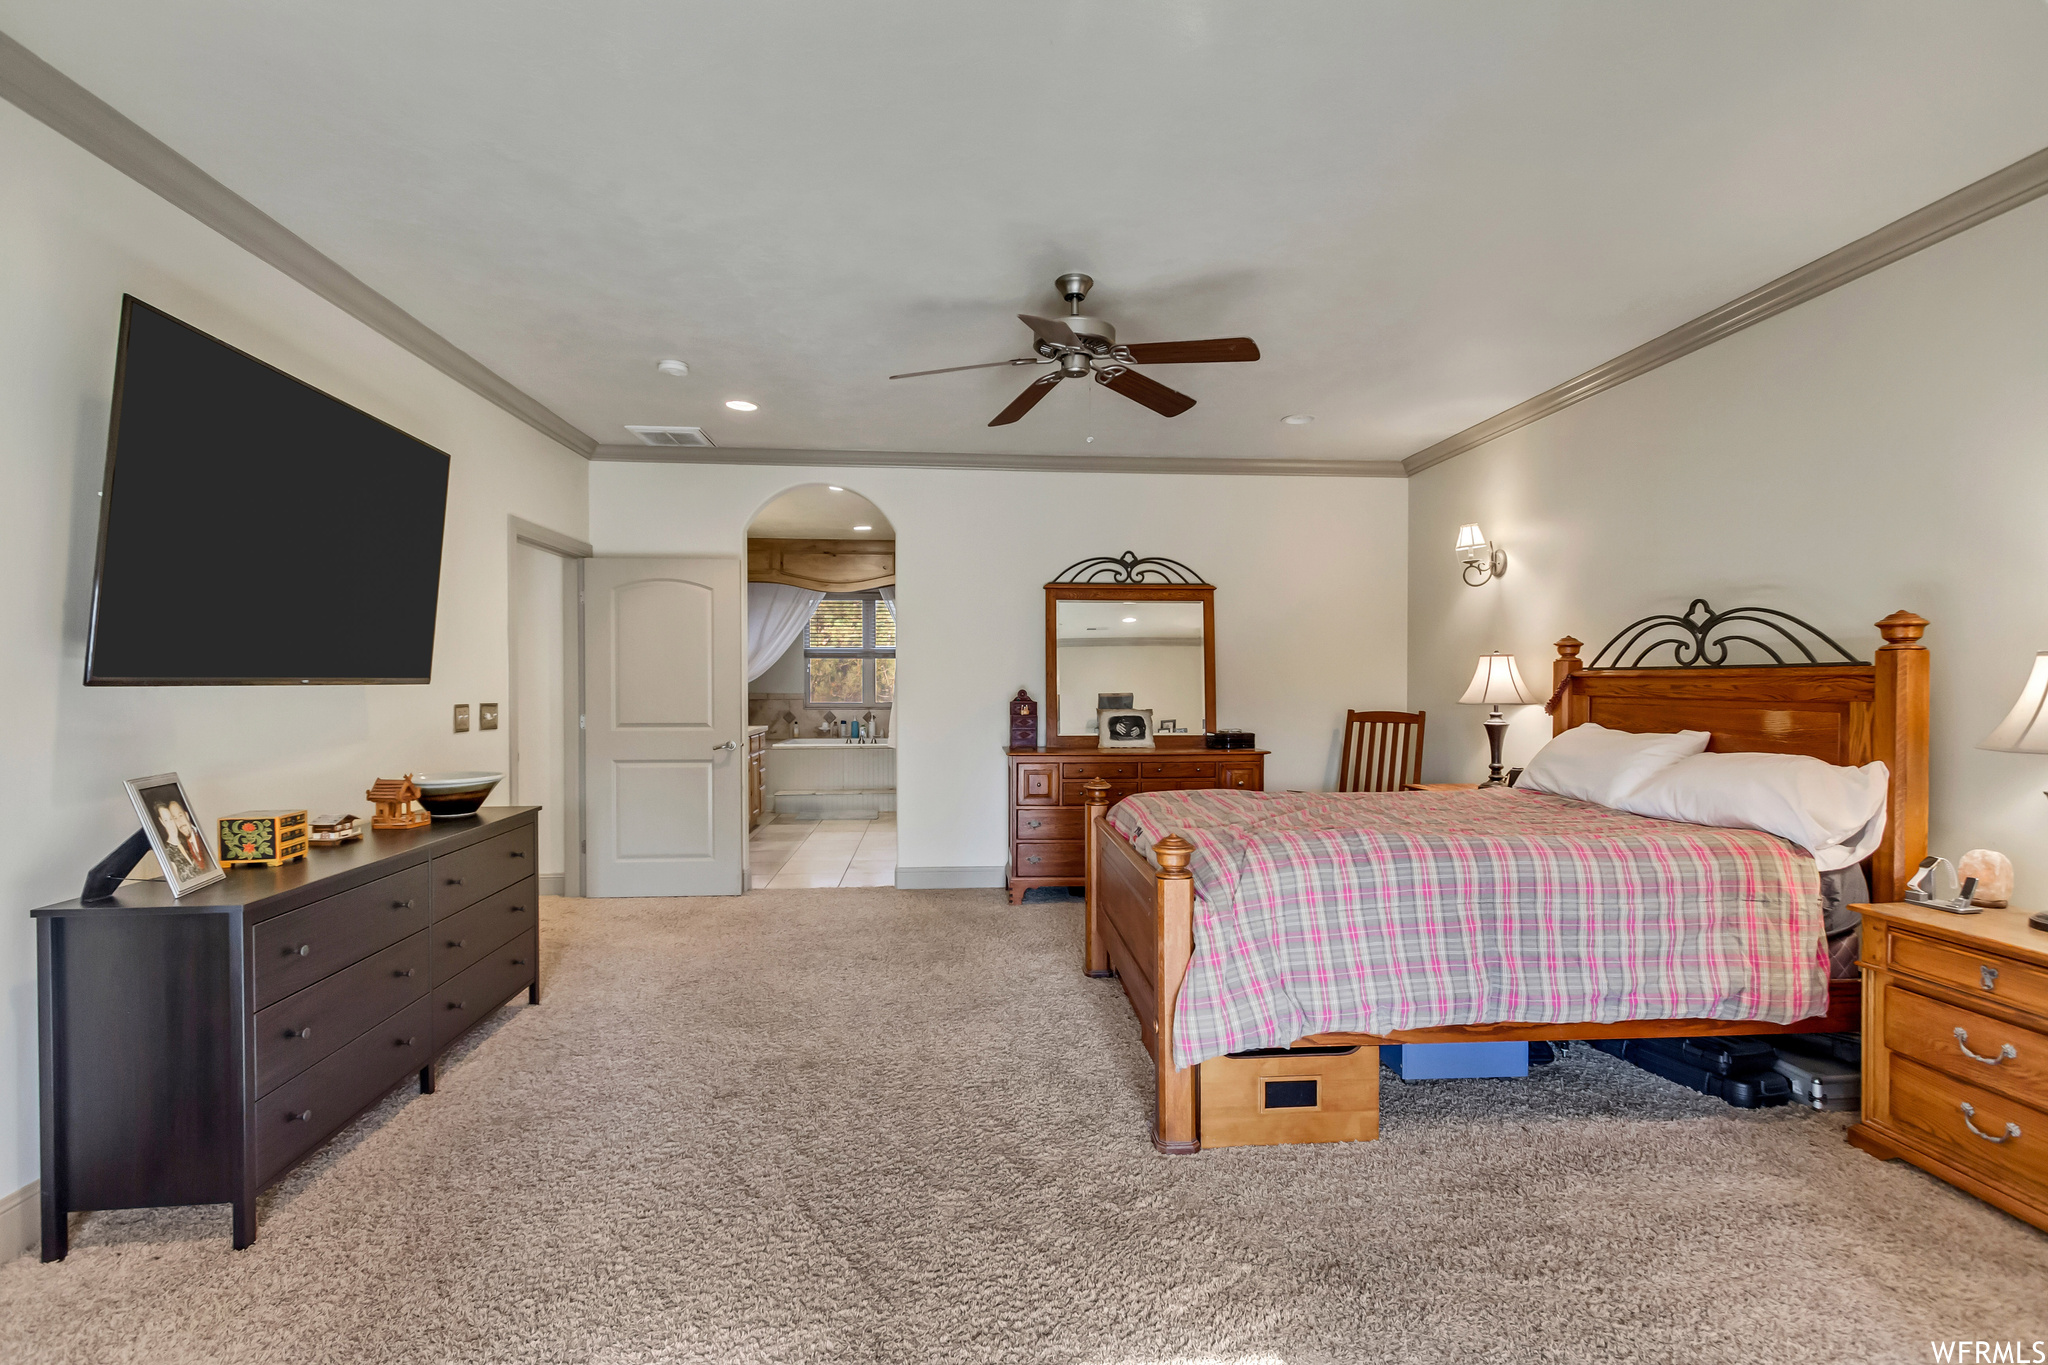 Carpeted bedroom featuring ensuite bathroom, crown molding, and ceiling fan